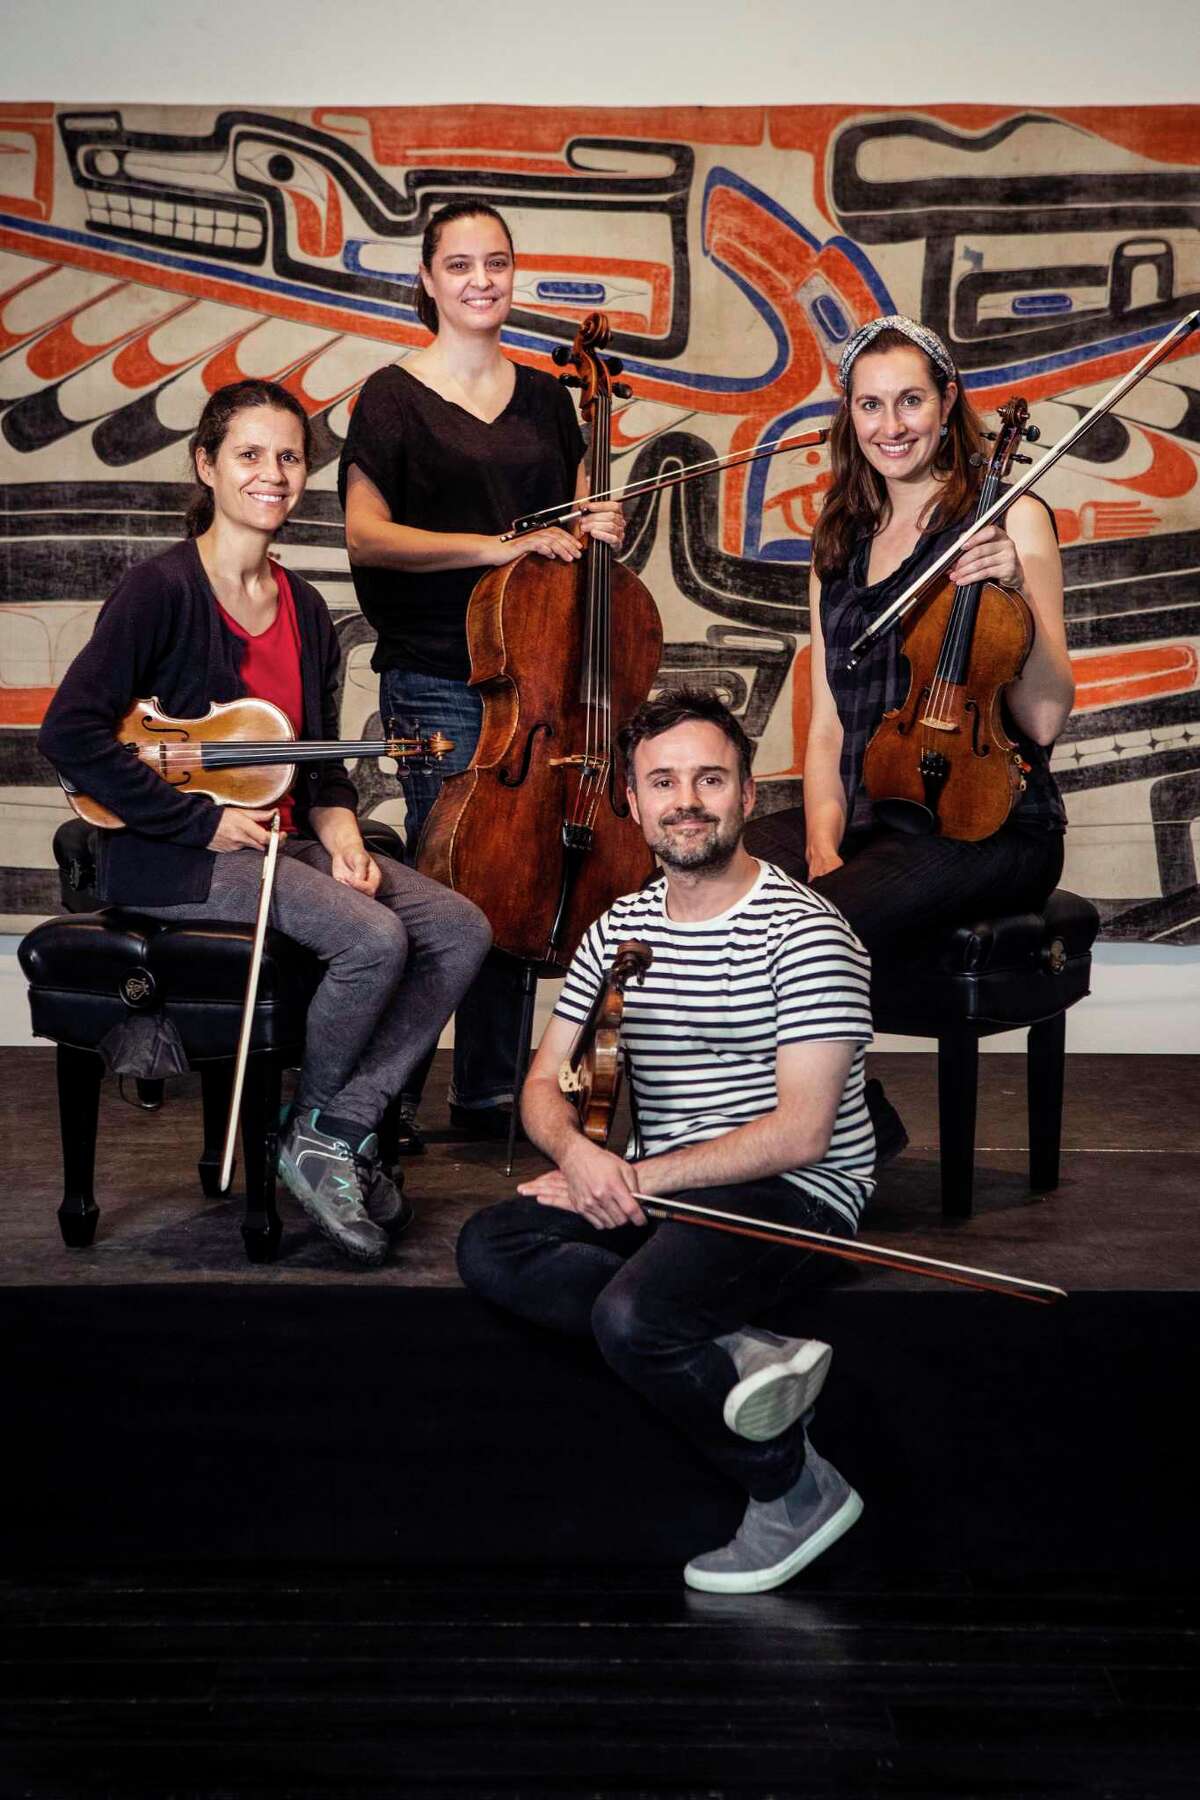 The Elias String Quartet, clockwise from left, Sara Bitlloch, Marie Bitlloch, Simone van der Giessen, and Donald Grant, pose for a portrait at The Menil Collection Tuesday, March 29, 2022 in Houston. The Elias String Quartet's Houston visit is unique among its stops around the United States. The quartet has been making stops around the country, doing curated performances of Beethoven's string quartet works. But Houston's Da Camera decided a 6-night series of performances would be a way to distinguish the Elias' shows from those in other markets.